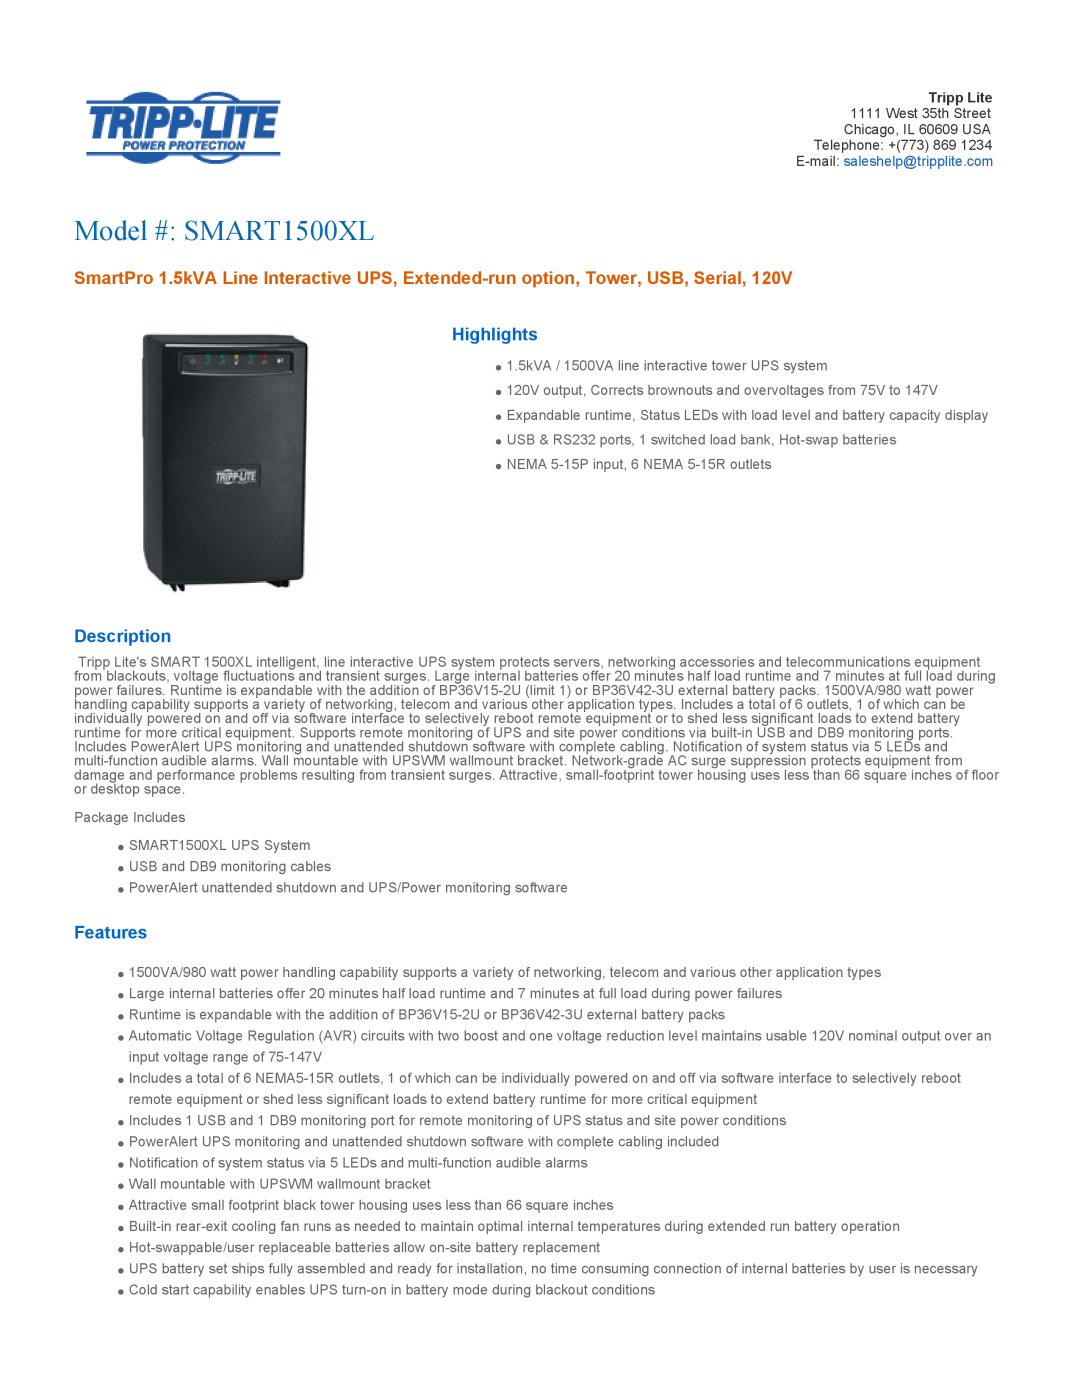 Tripp Lite AGSM1050PJR3 owner manual Important Safety Instructions, Quick Installation, Basic Operation, Storage & Service 